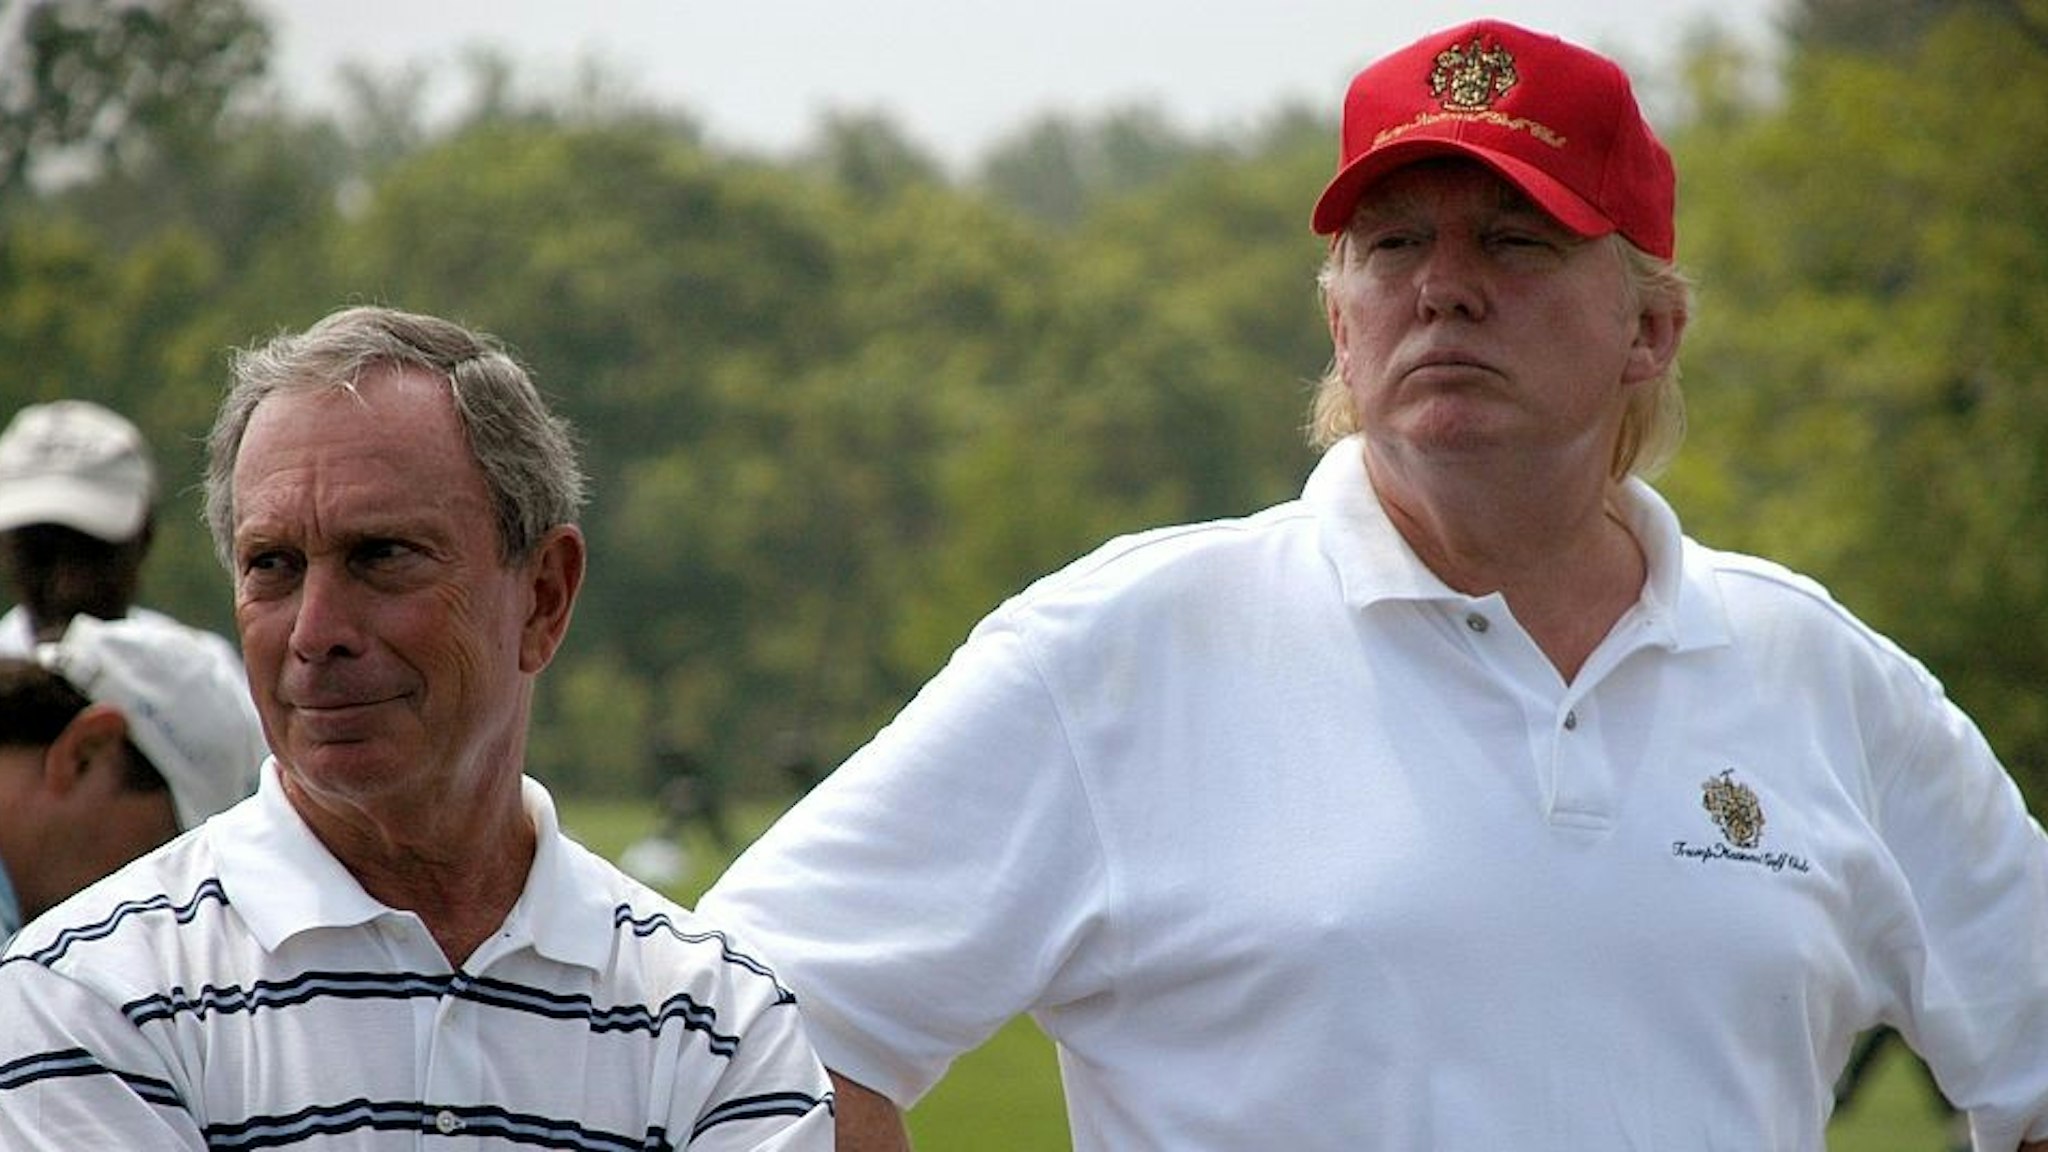 Mayor Michael Bloomberg and Donald Trump attend The Fourth Annual JOE TORRE SAFE AT HOME FOUNDATION Golf Classic at Trump National Golf Course on July 20, 2007 in Briarcliff Manor, NY. (Photo by CLINT SPAULDING/Patrick McMullan via Getty Images)